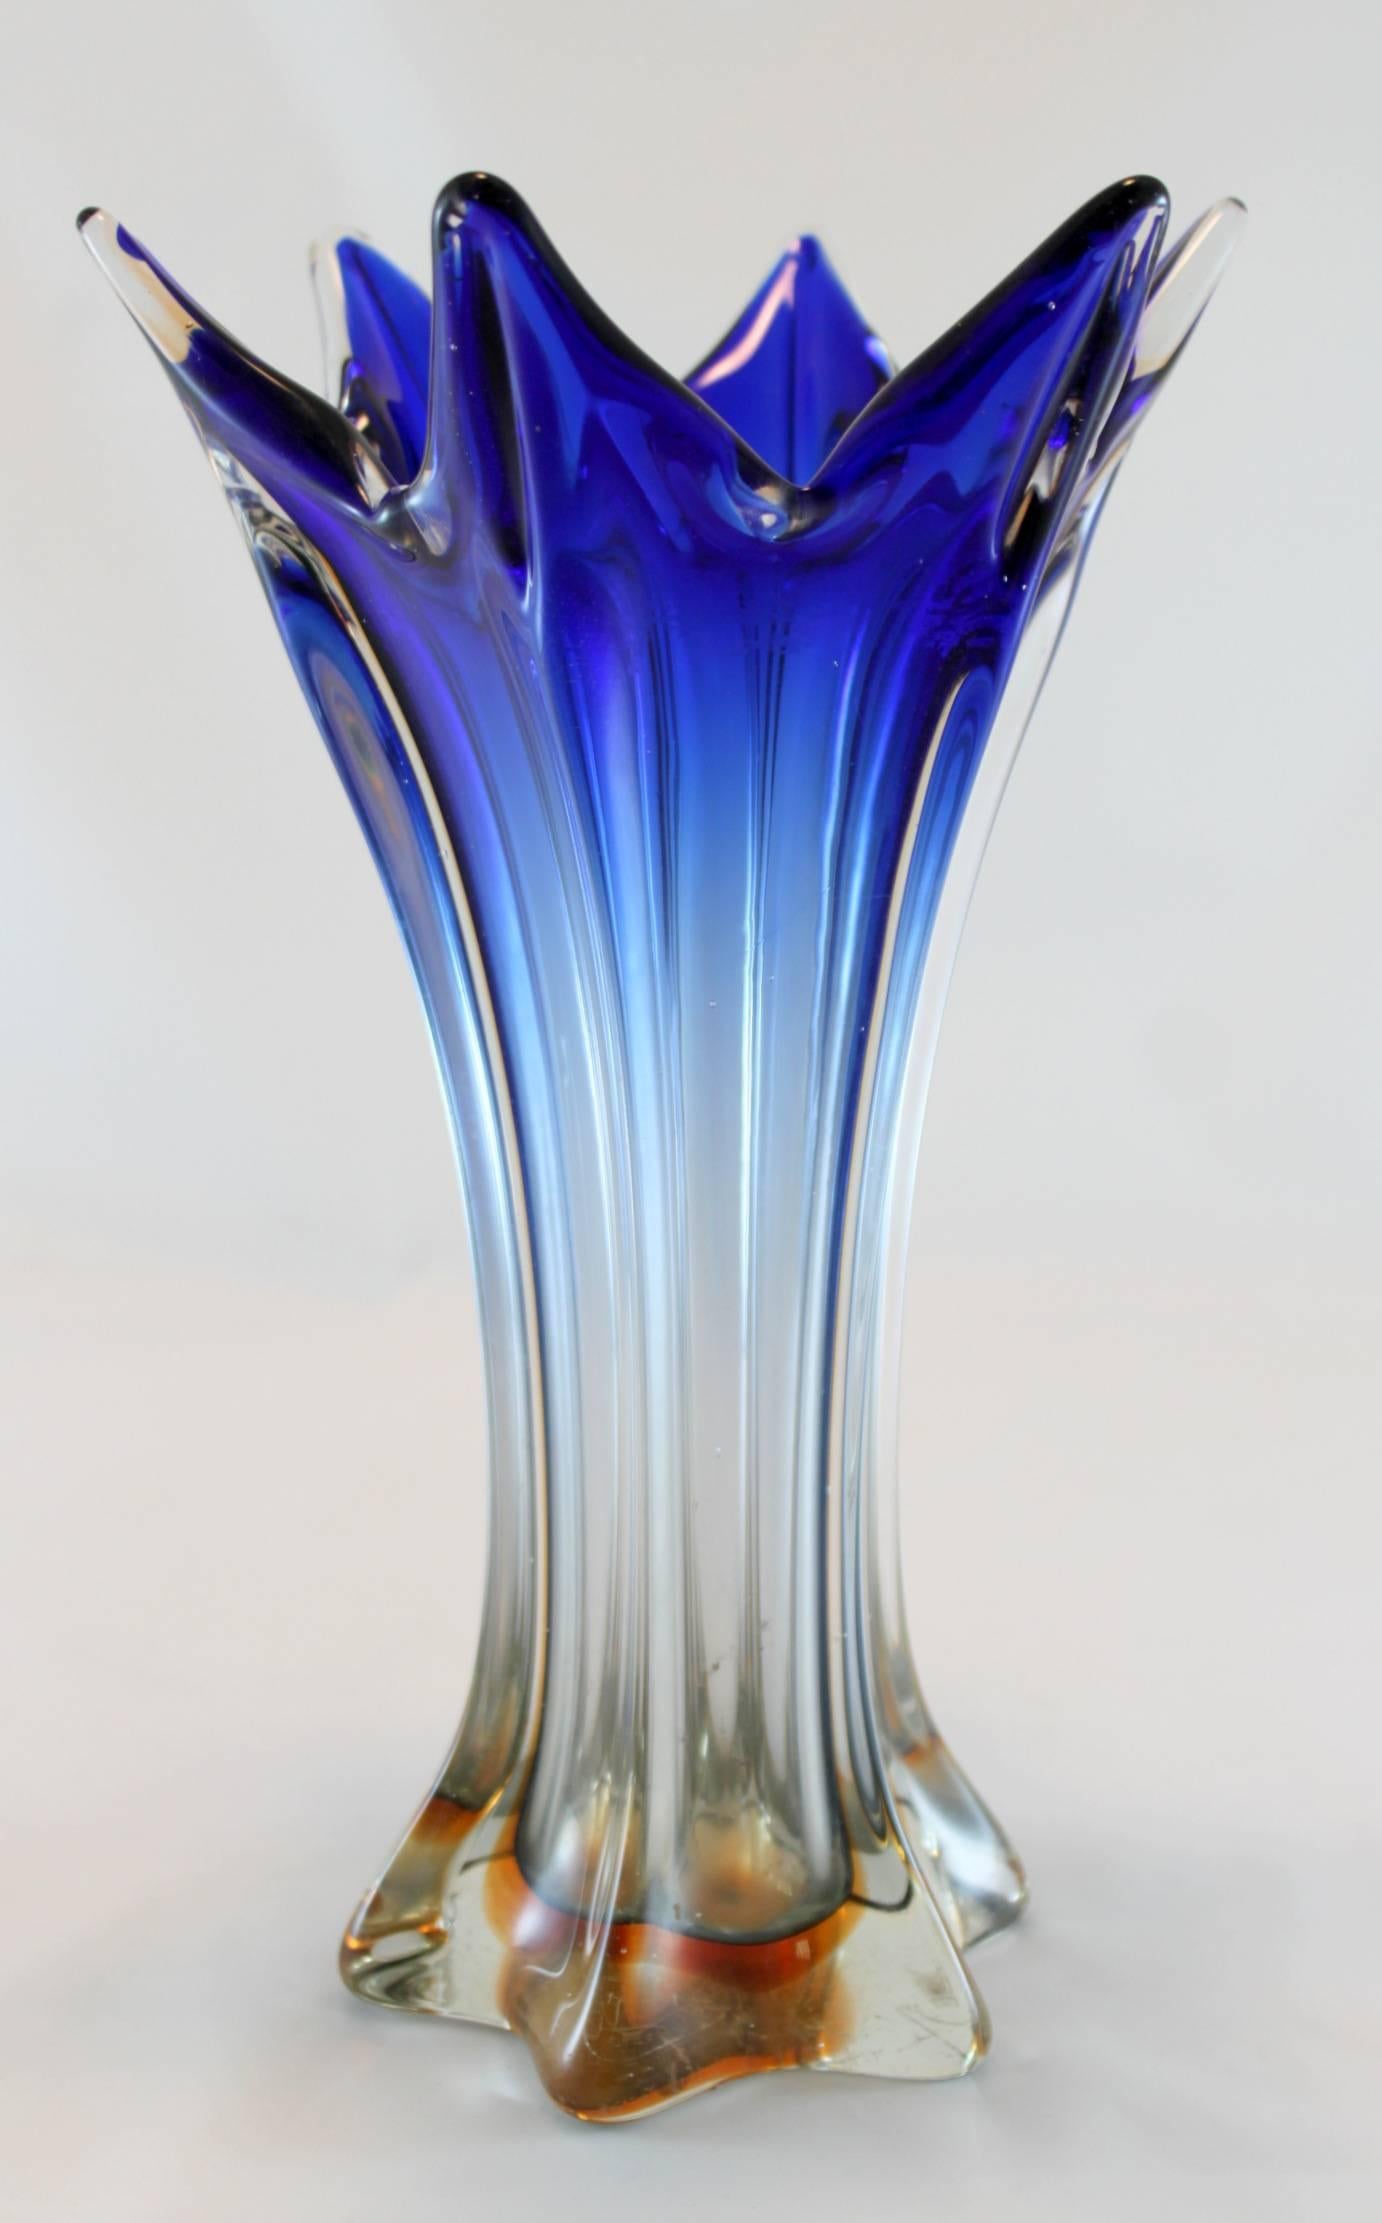 Vintage Murano glass vase
circa 1950s

Approximate dimensions 
Diameter x height 17.2 x 27.1 cm
Approximate weight 1.2 Kg

Condition: Has some age related fading on the interior glass at the
top, some surface scratches on the base, good